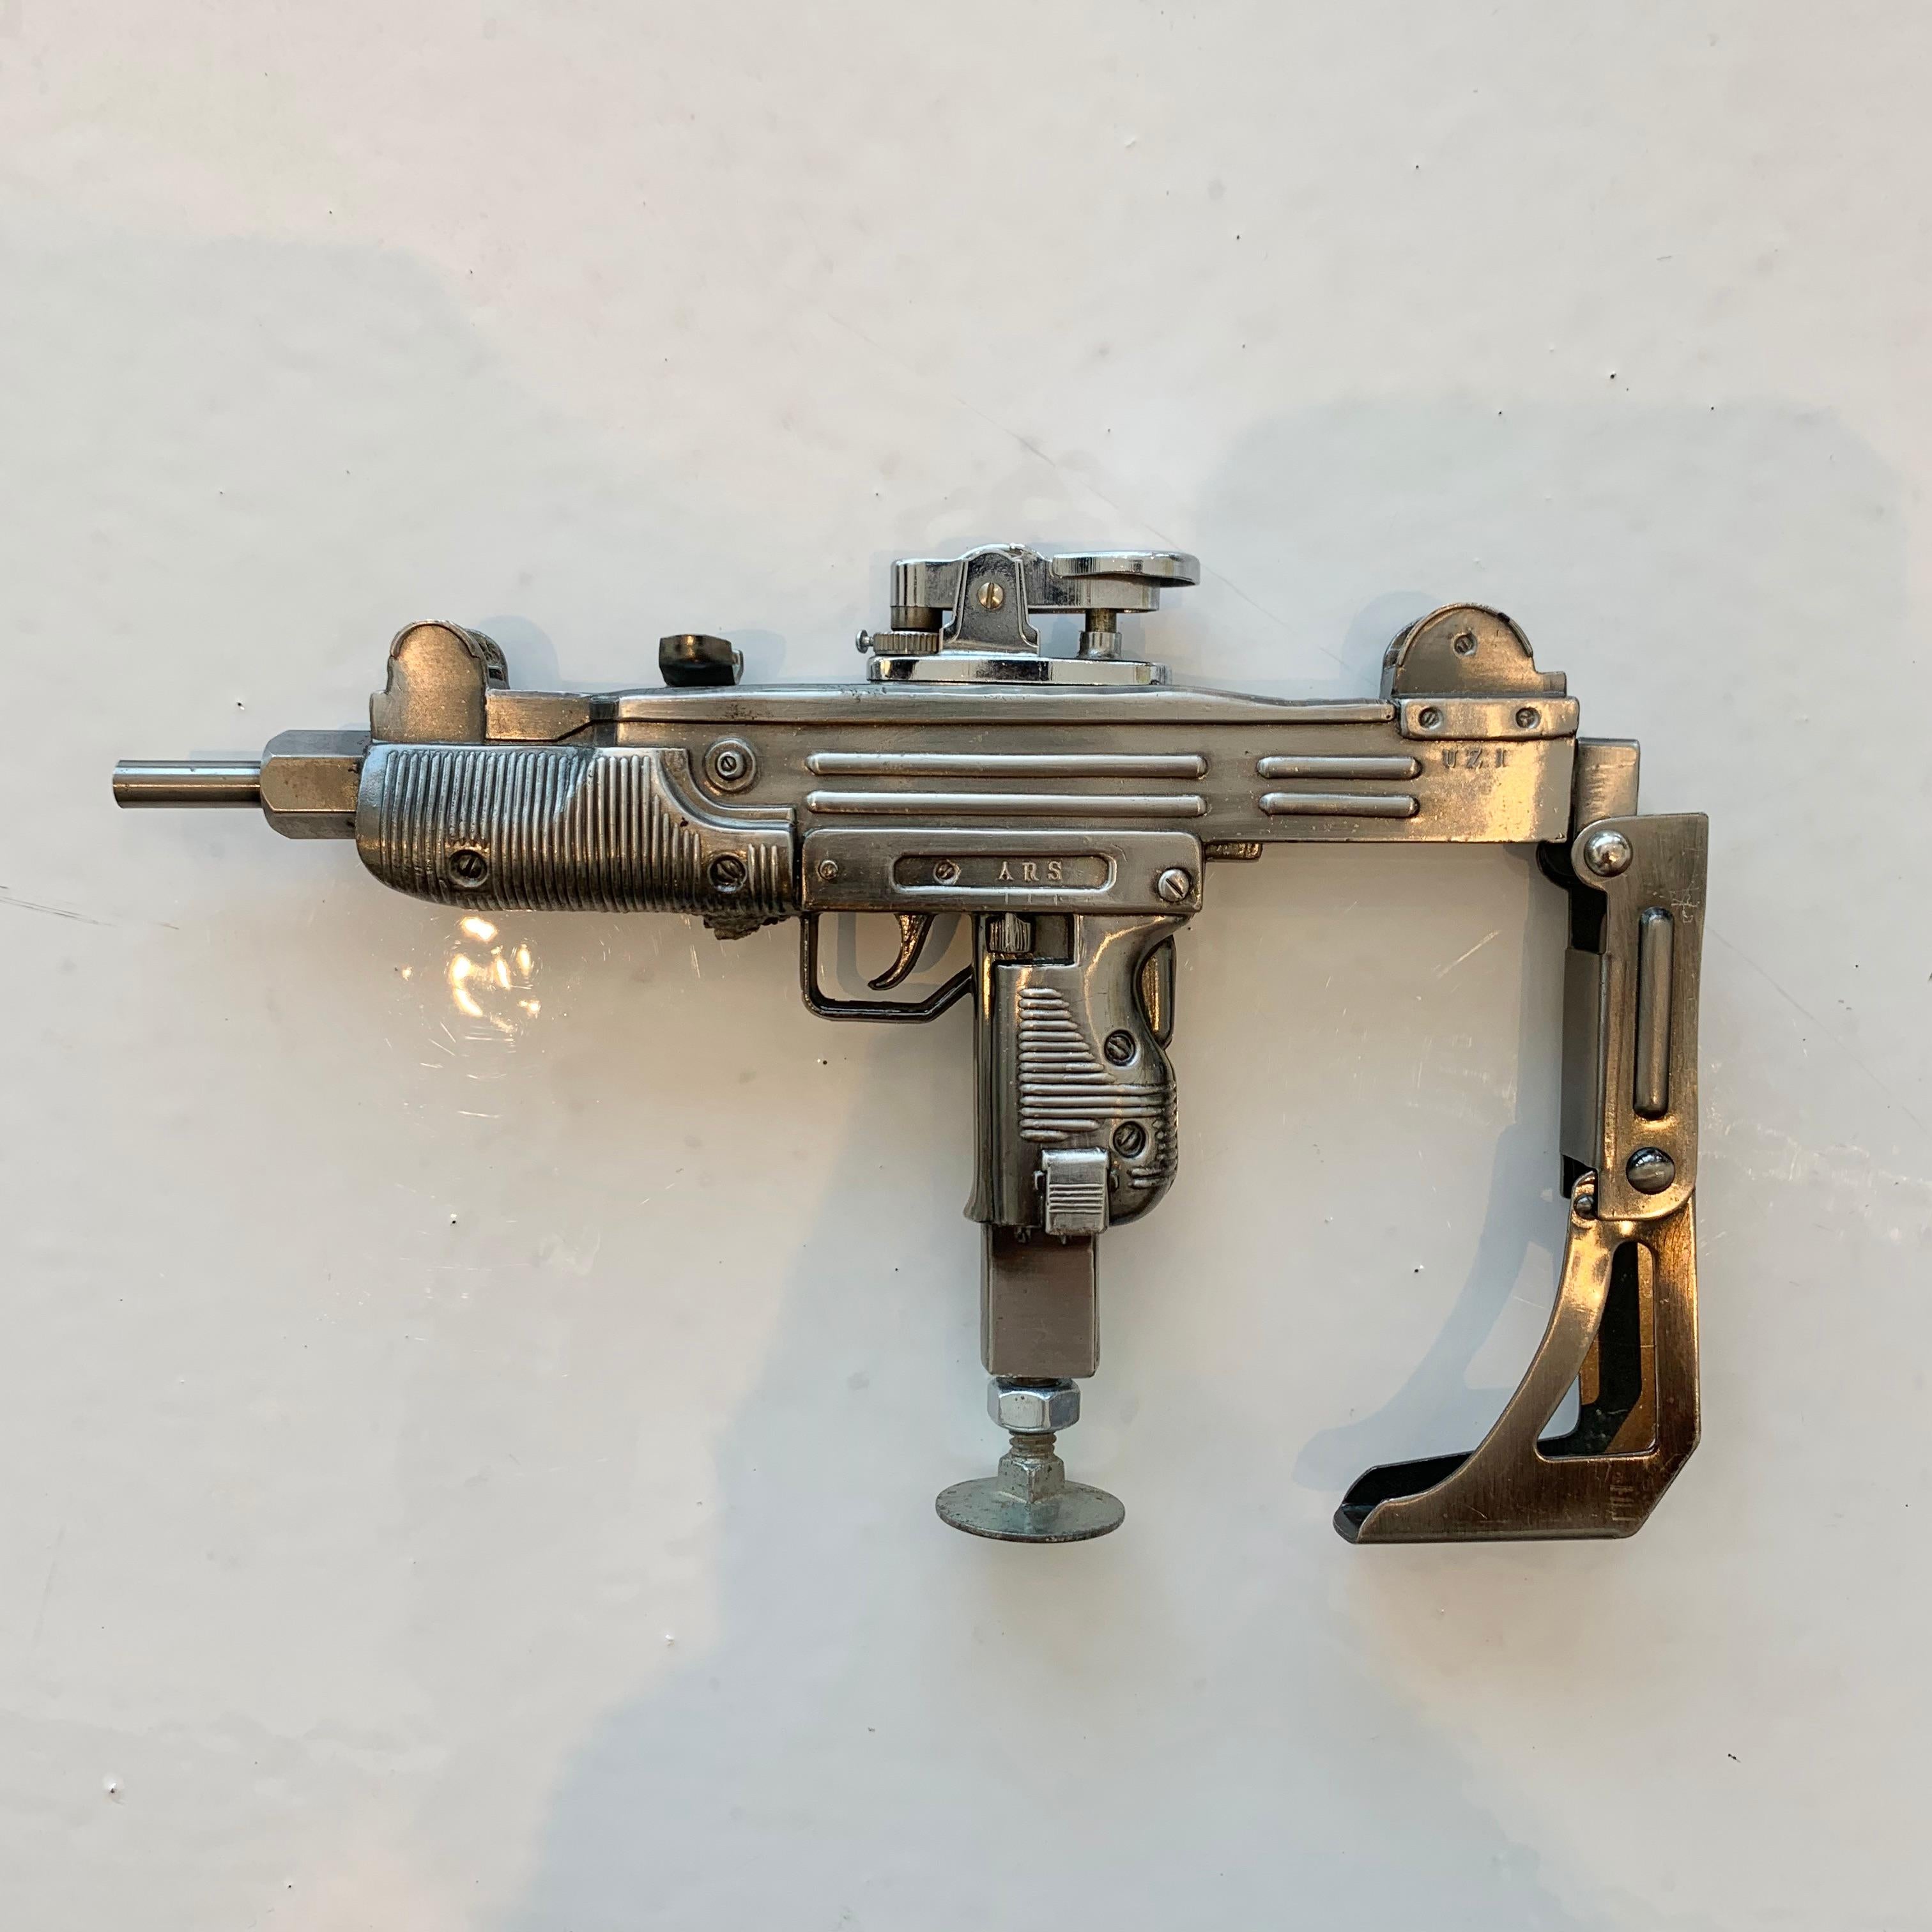 Cool vintage table lighter in the shape of an Uzi, Israeli machine gun. Made of metal and stands up on its own. Arm brace folds up and down. Cool tobacco accessory and conversation piece. Working lighter. 

  